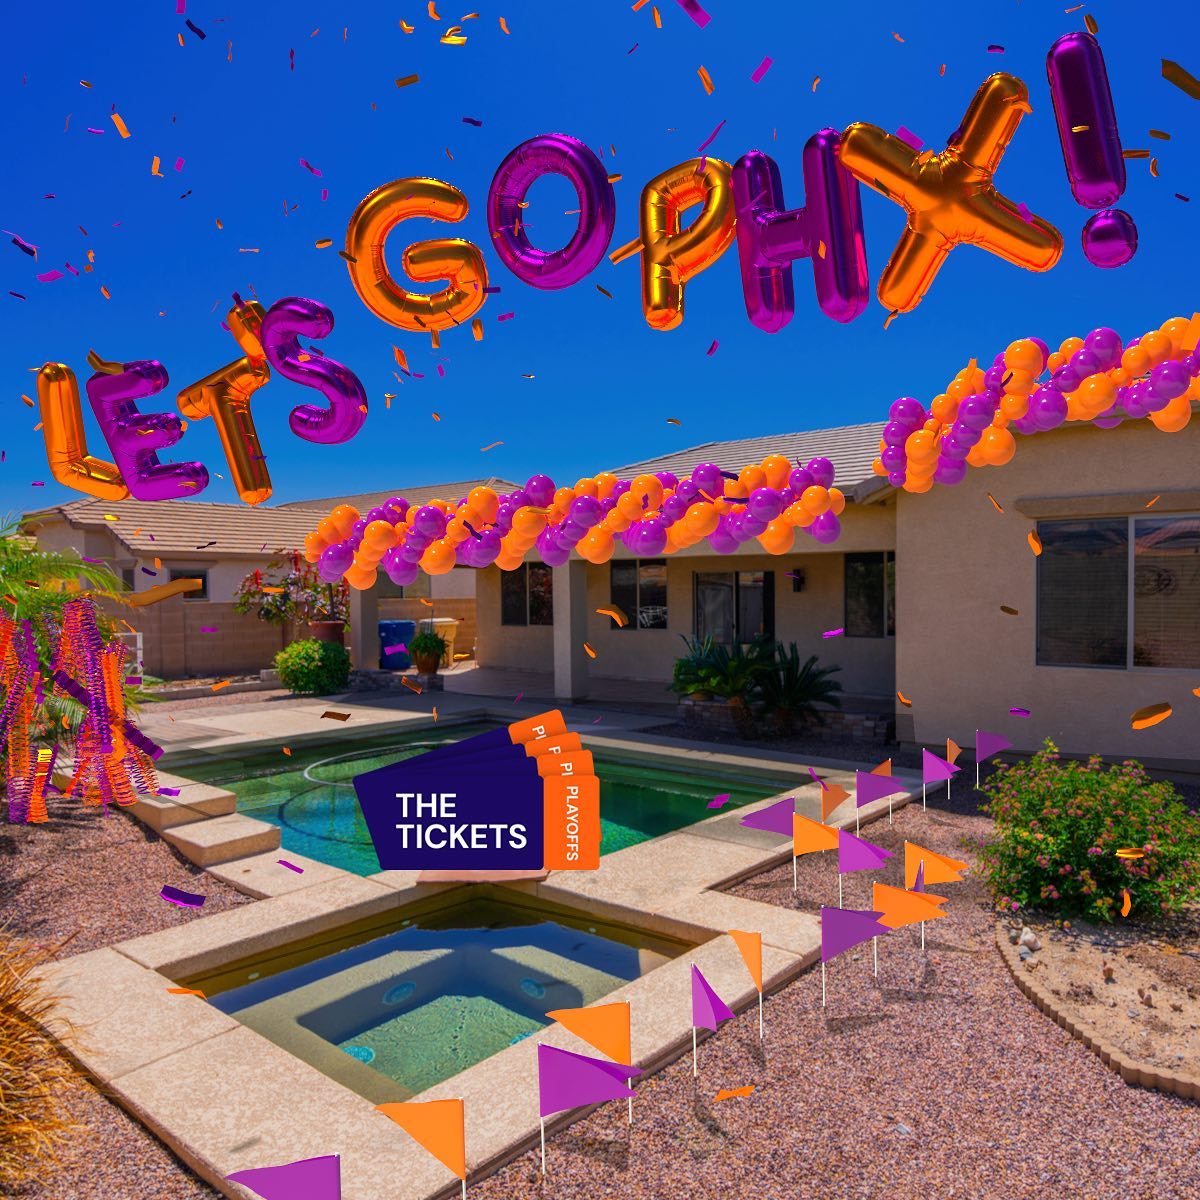 Where are our fellow Phoenix Suns fans?! 🏀 Do you think you’d look great sitting in box seats at the Suns’ next home playoff game? Let’s put it to the test. @opendoor is giving away four terrace box seats to one lucky winner! To enter, follow the steps below for your chance to win. Happy home hunting! #HuntForThePrize No pur nec. 18+ Ends 5/7

1. Find the hidden tickets in Opendoor's Phoenix listings at opendoor.com/homes/phoenix 
2. Comment on Opendoor's post with why you deserve to win, using the hashtags #HuntForThePrize #Contest
3. DM @opendoor with a screenshot of the home listing that contains the tickets with the address included